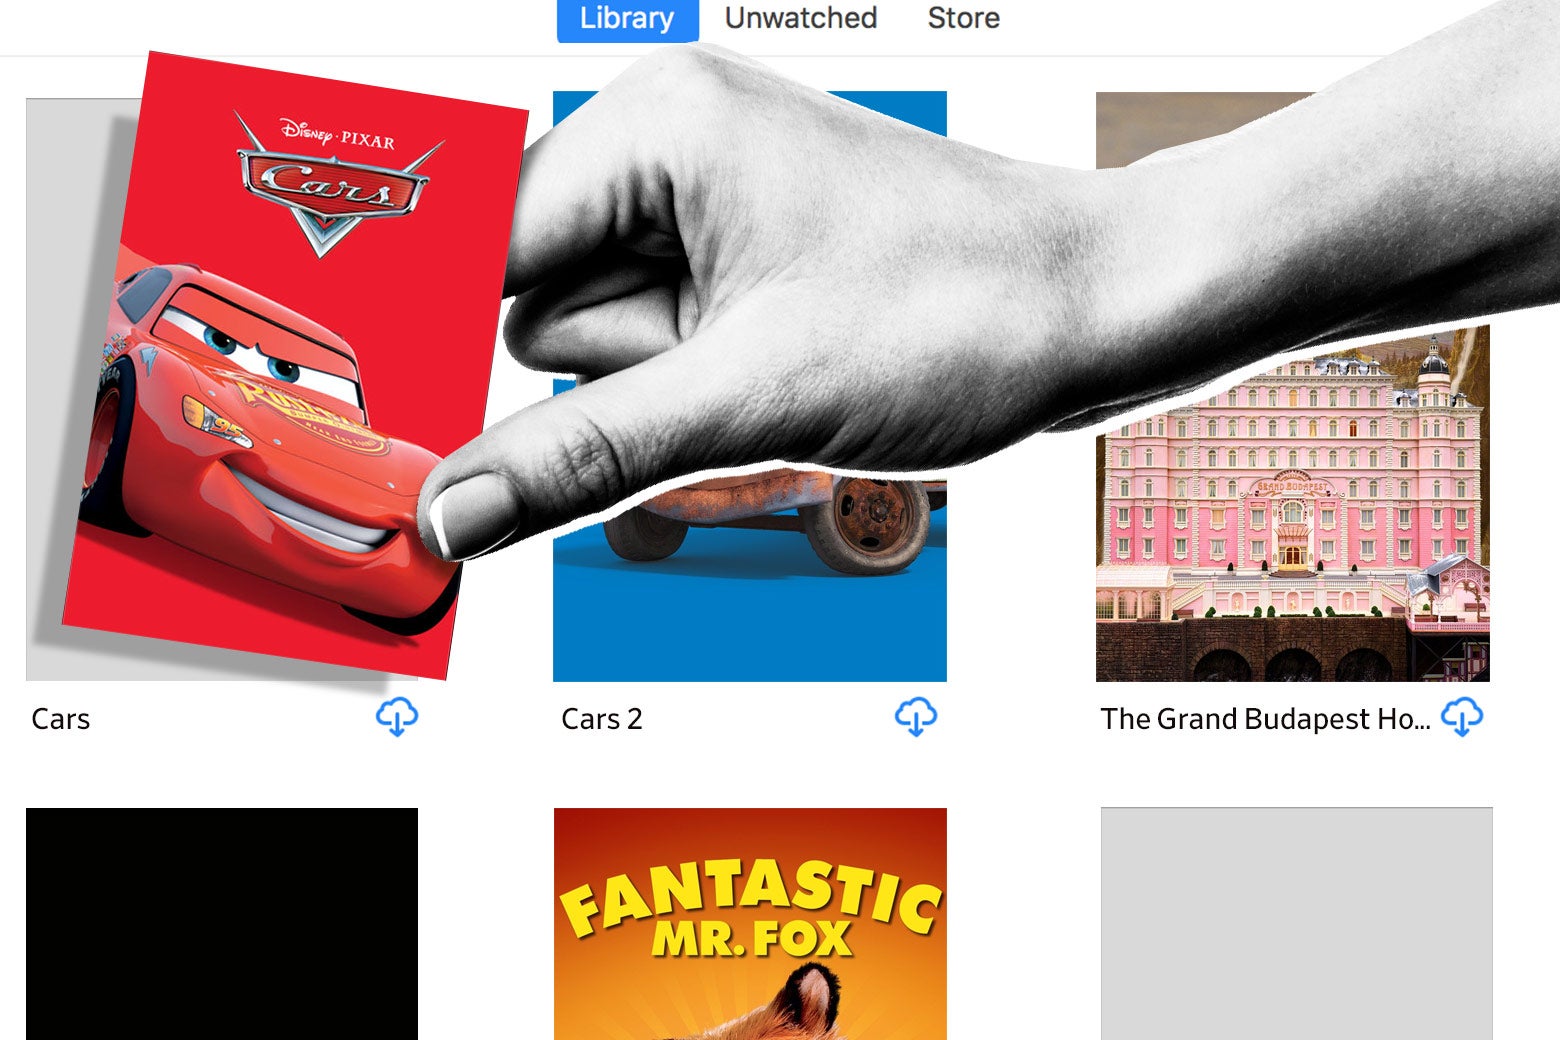 A hand takes a purchased download of the movie cars from iTunes.